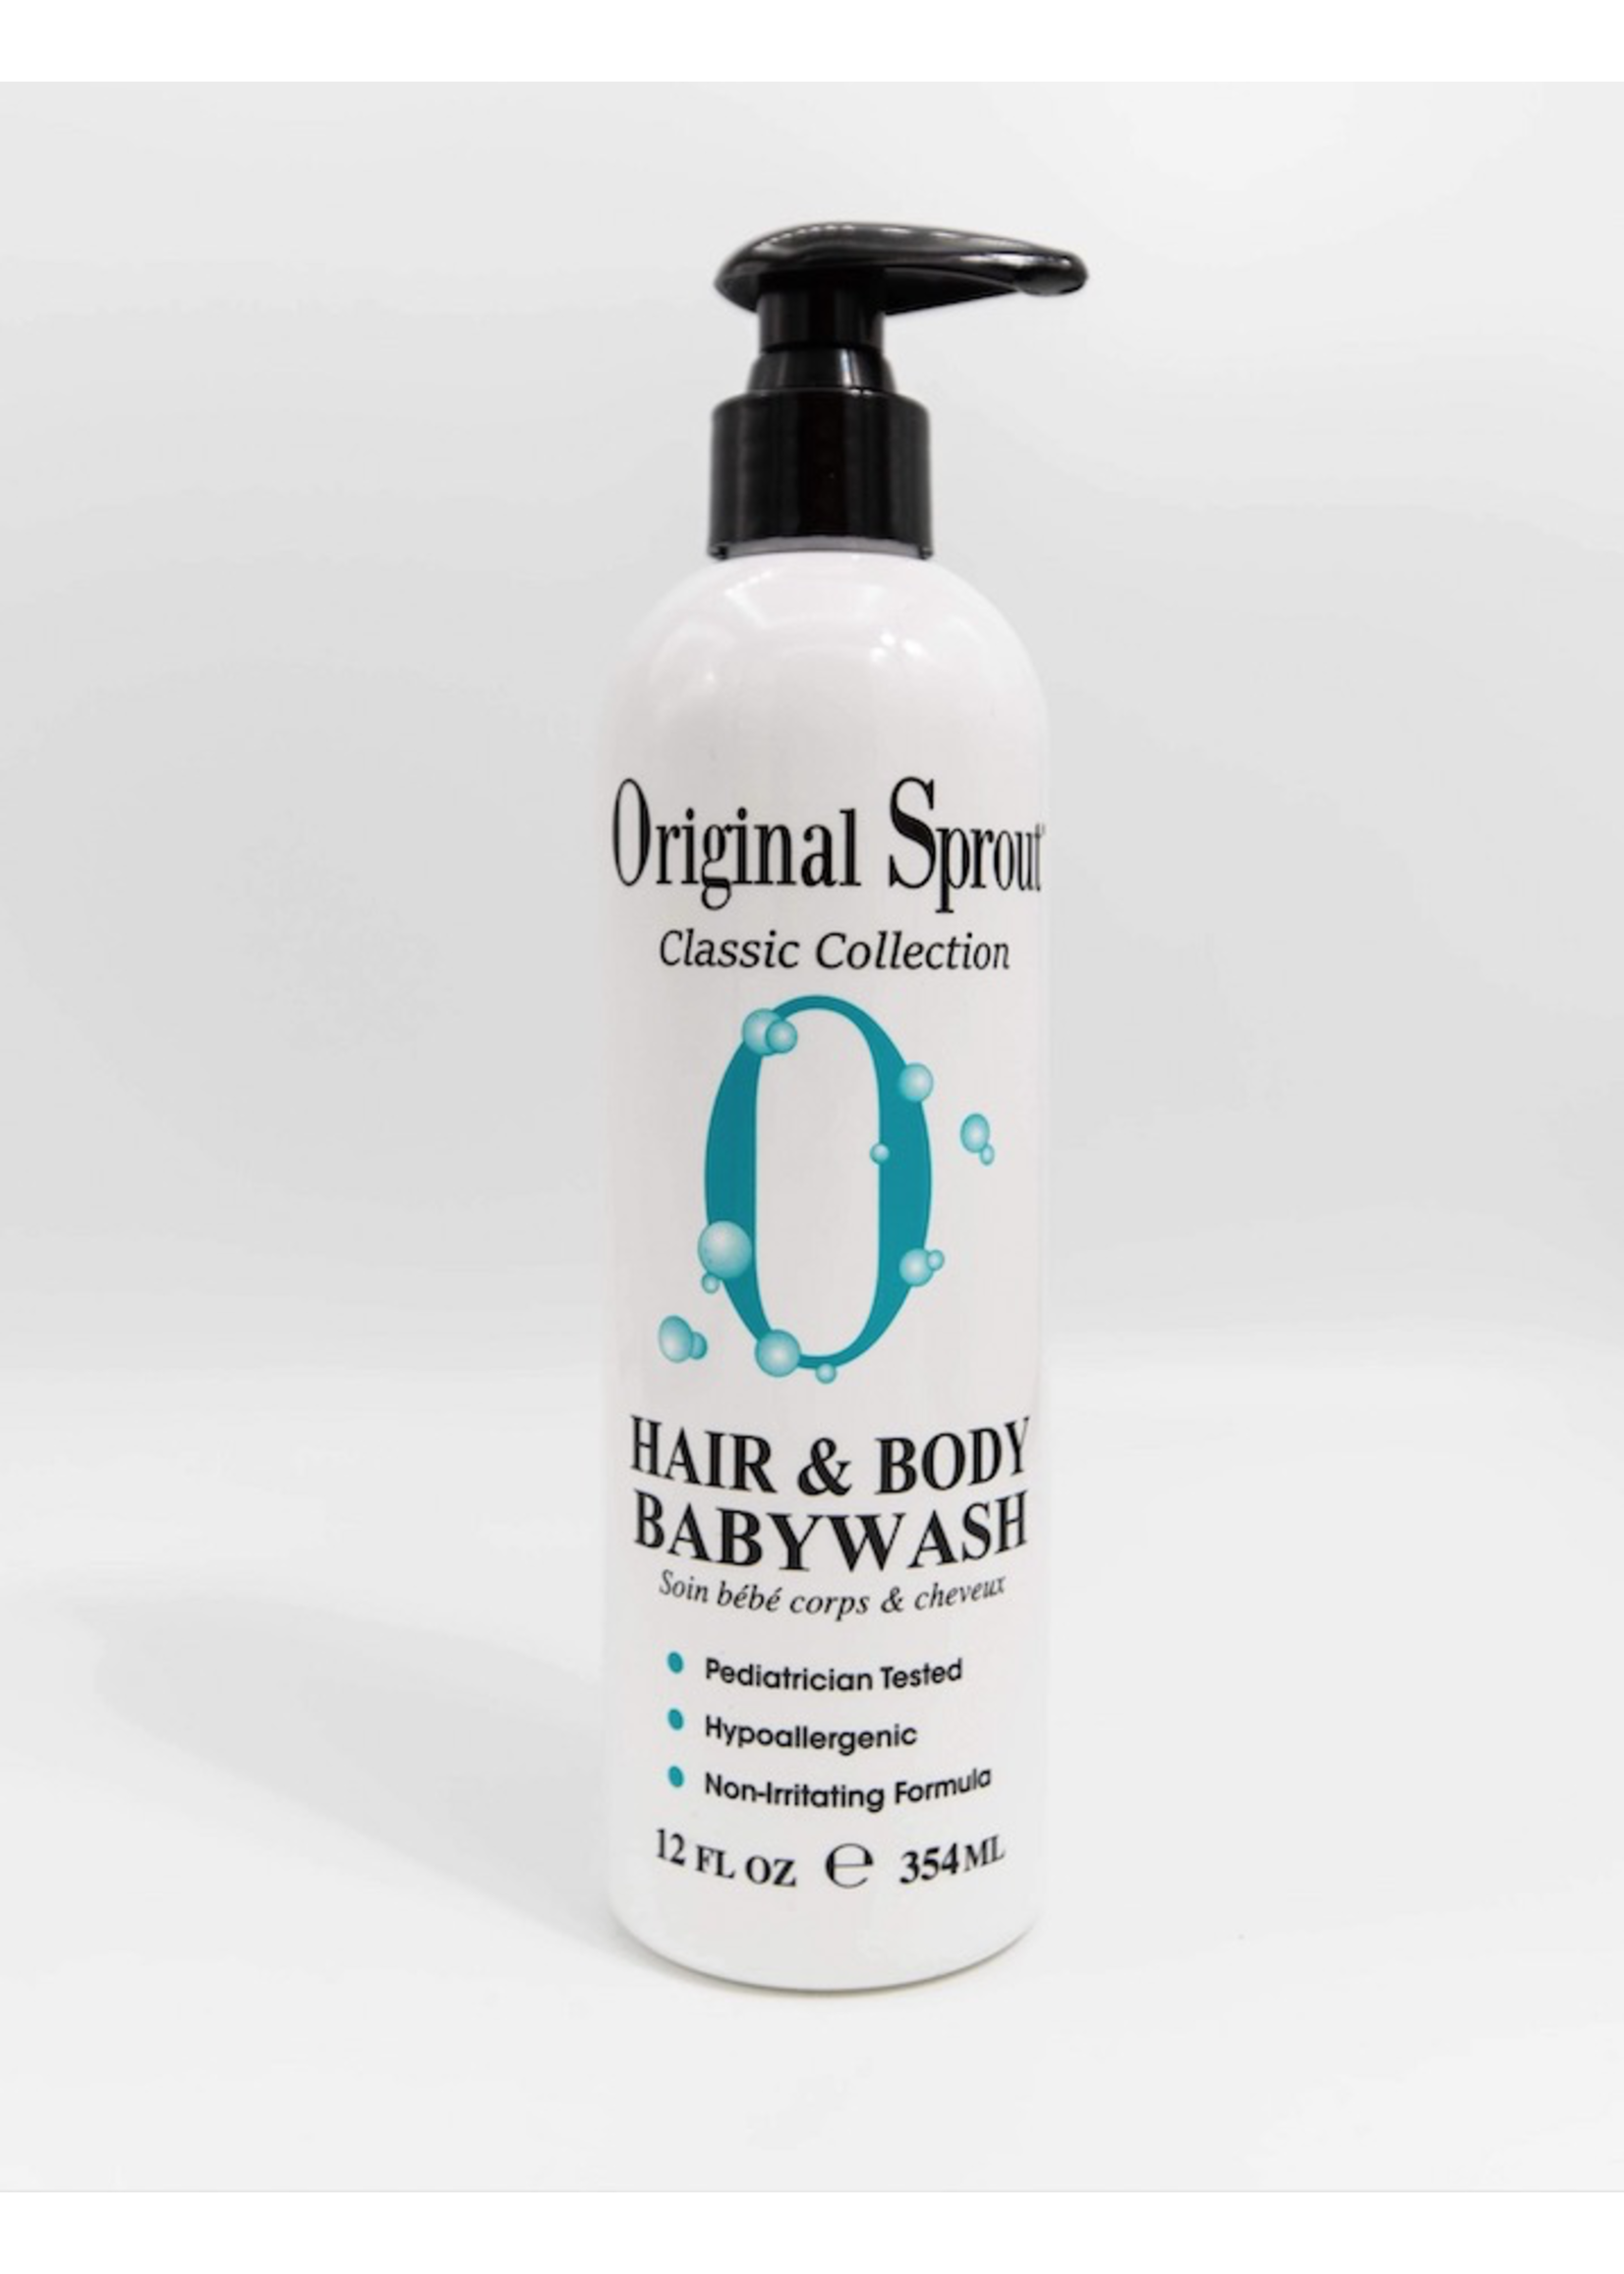 Original Sprout Original Sprout, Hair & Body Baby Wash 12oz